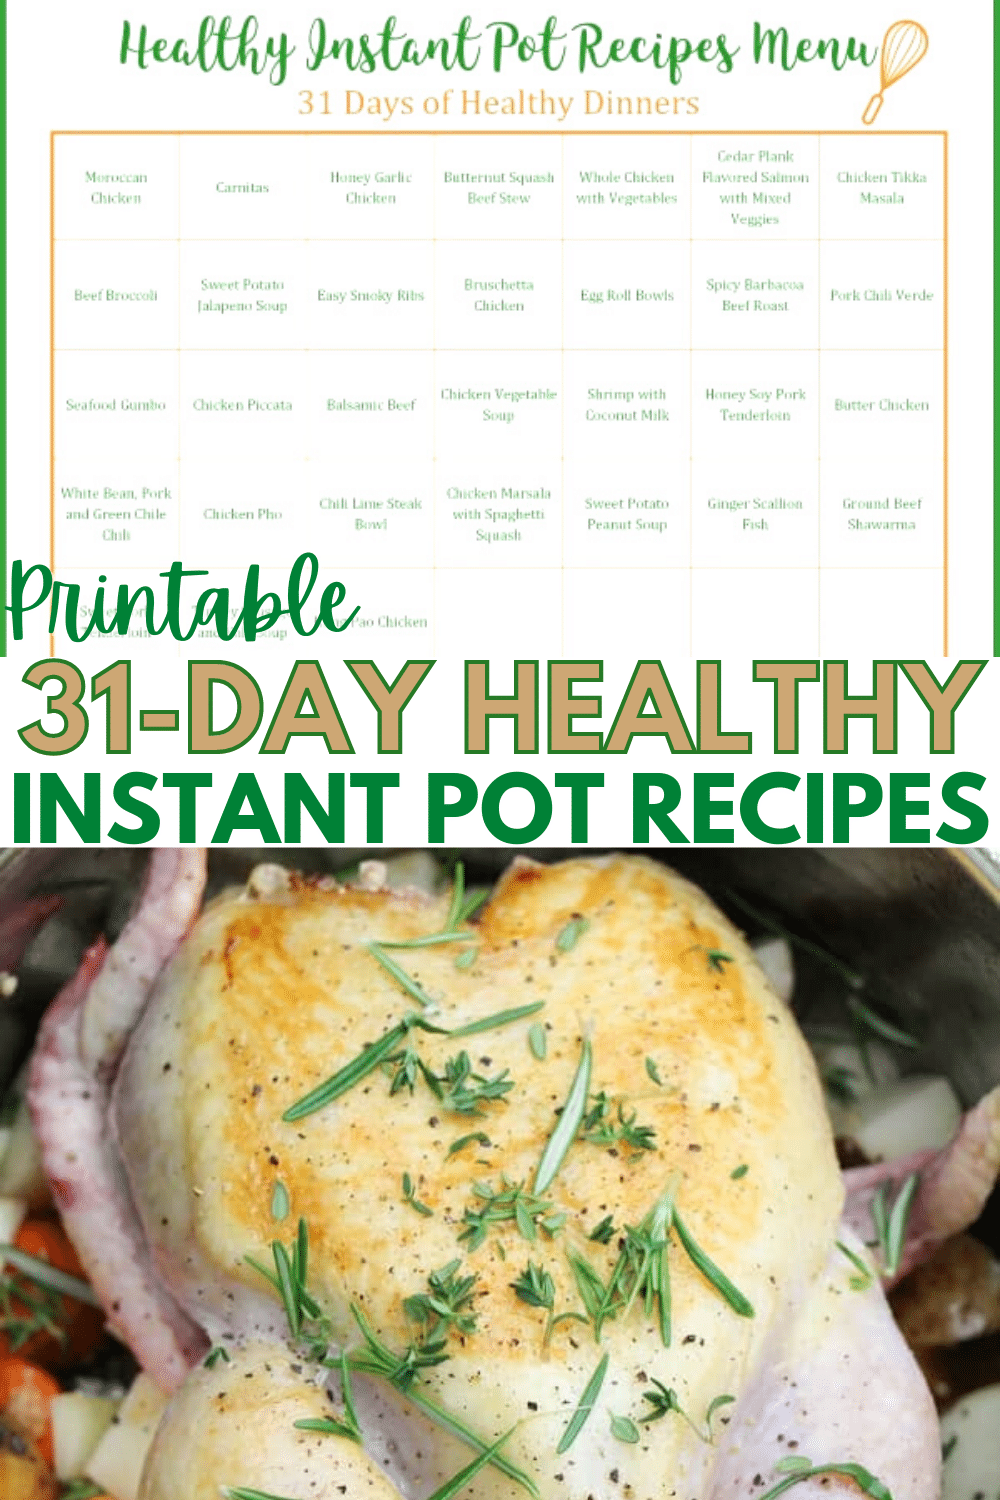 Food can be both convenient AND healthy. Here's an entire month of Healthy Instant Pot Recipes to prove it! Eating healthy has just gotten a lot easier. #instantpot #pressurecooker #healthyeating via @wondermomwannab